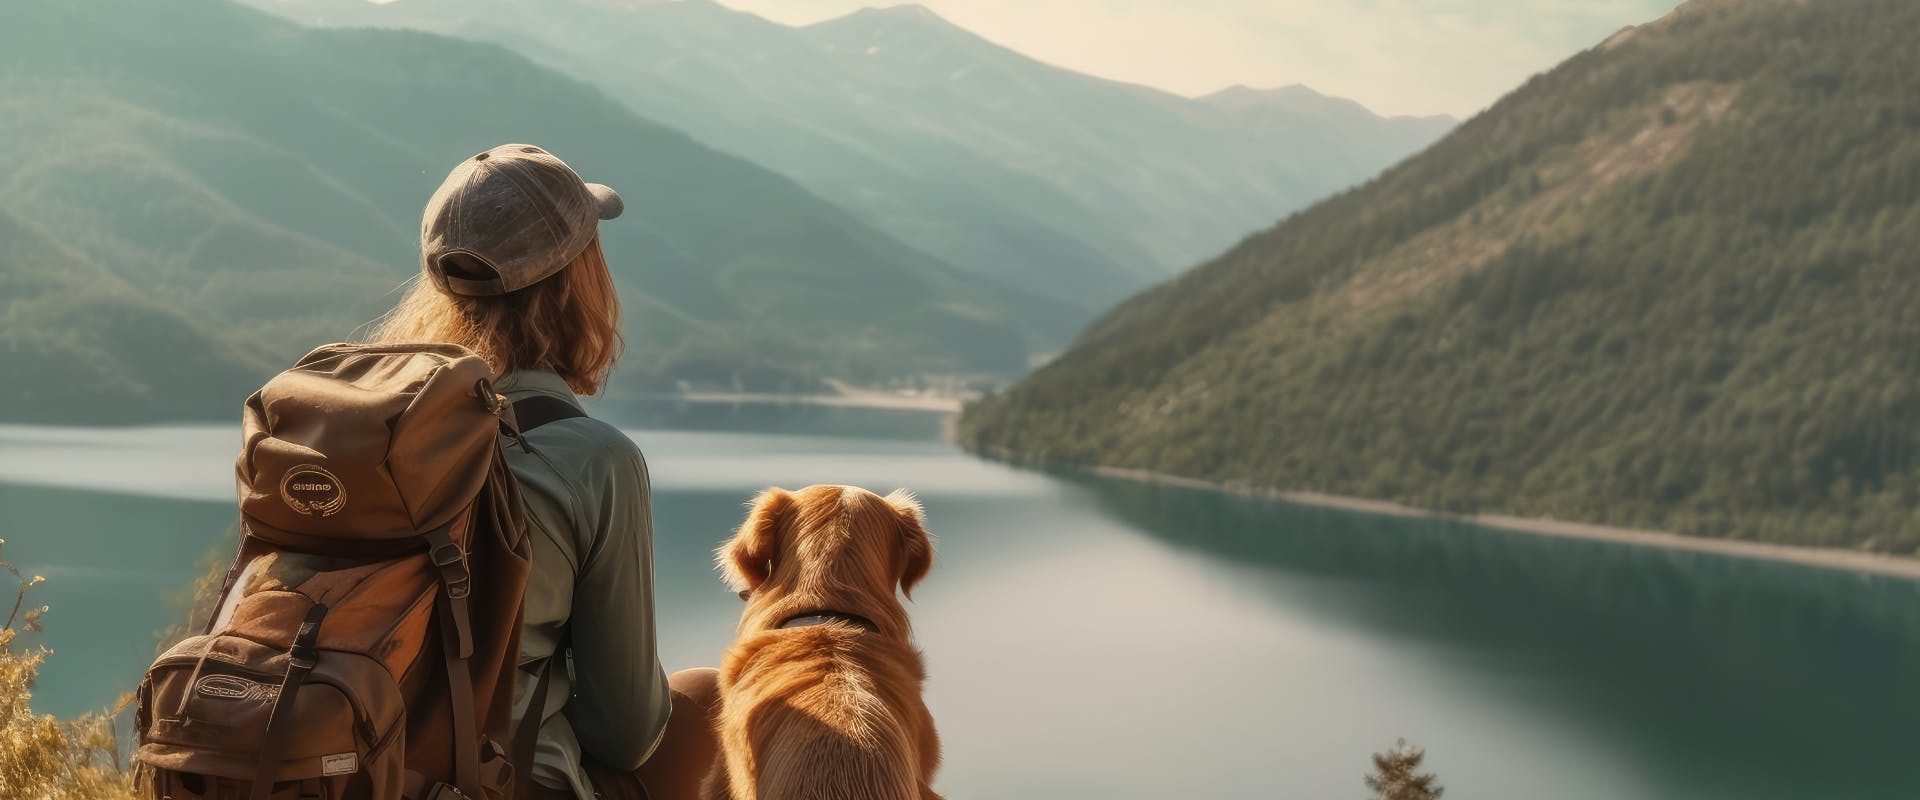 solo female traveler and dog looking at a mountain lake view